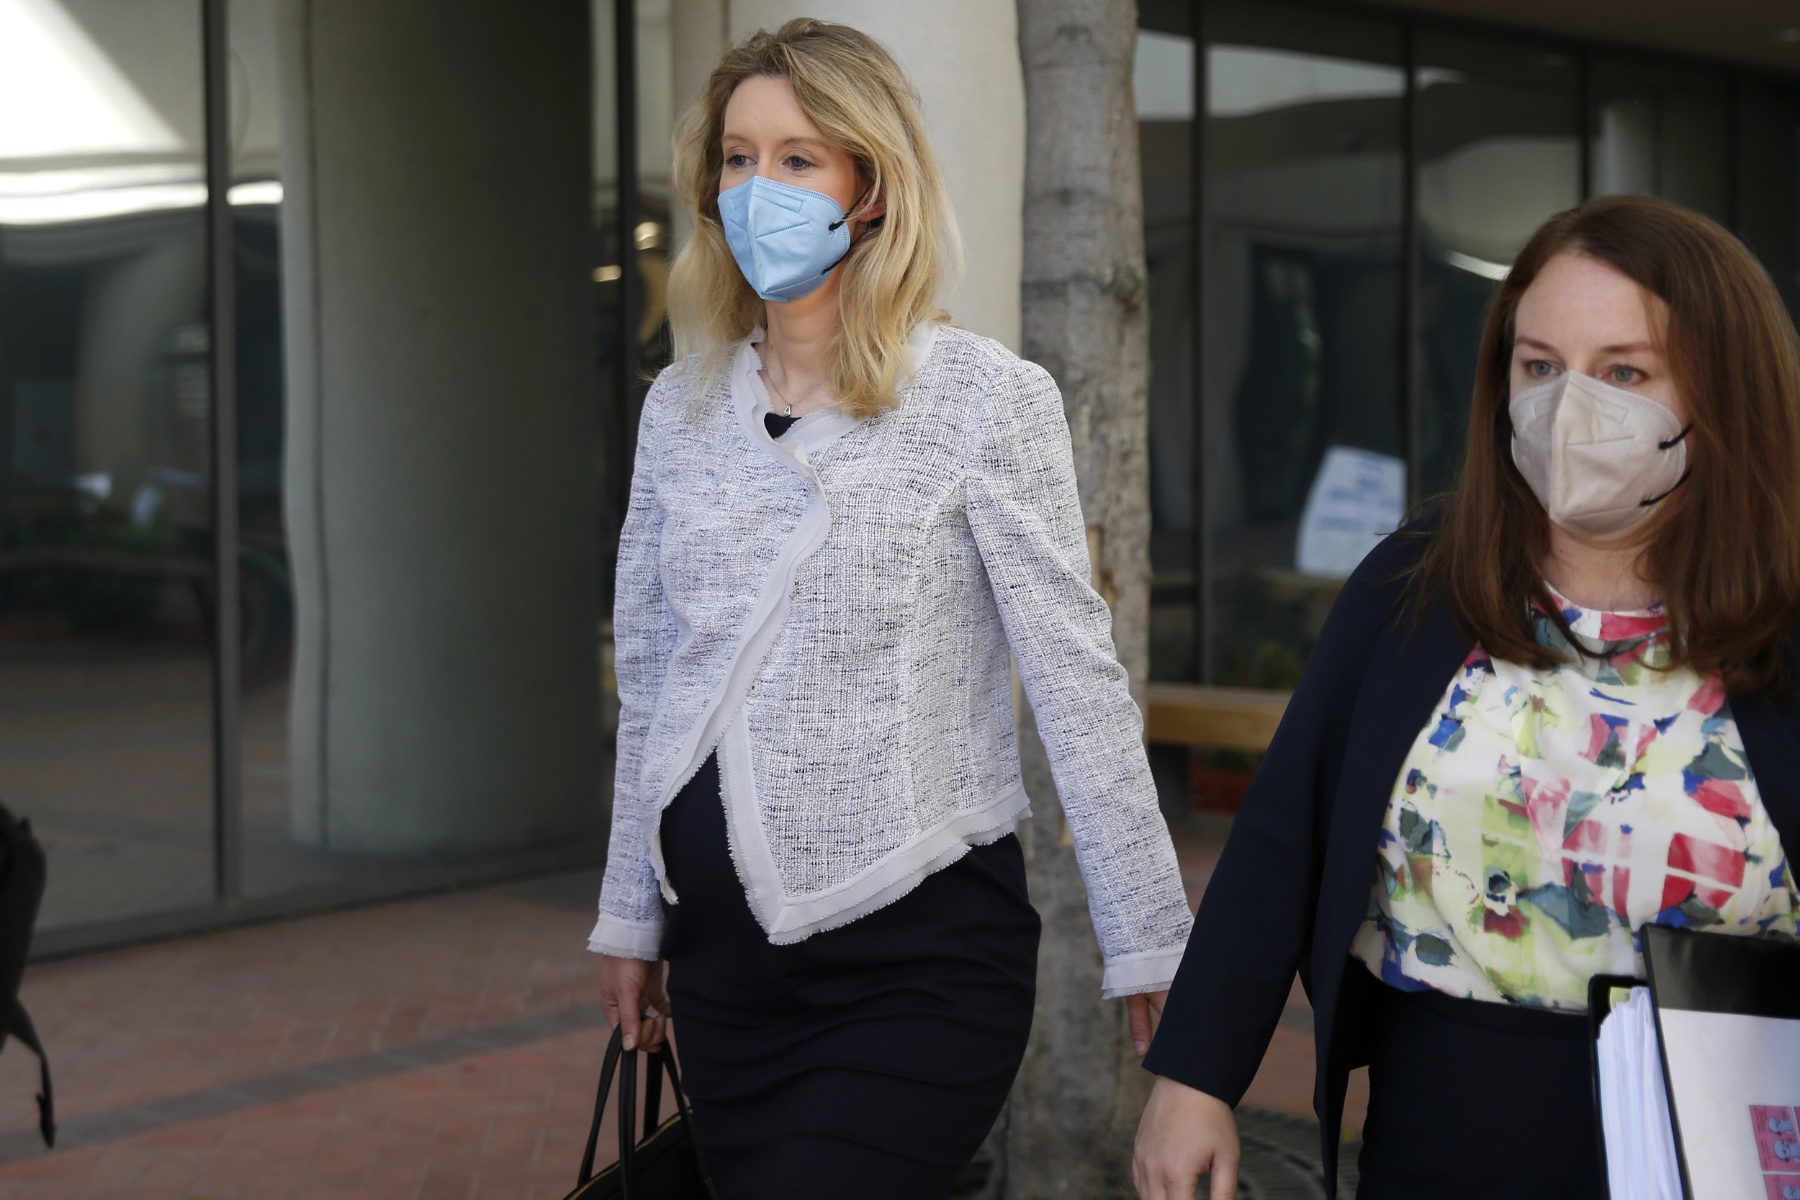 Theranos founder Elizabeth Holmes, pregnant with her first child, leaves the Robert F. Peckham Federal Building with her defense team in downtown San Jose, California in May 2021.